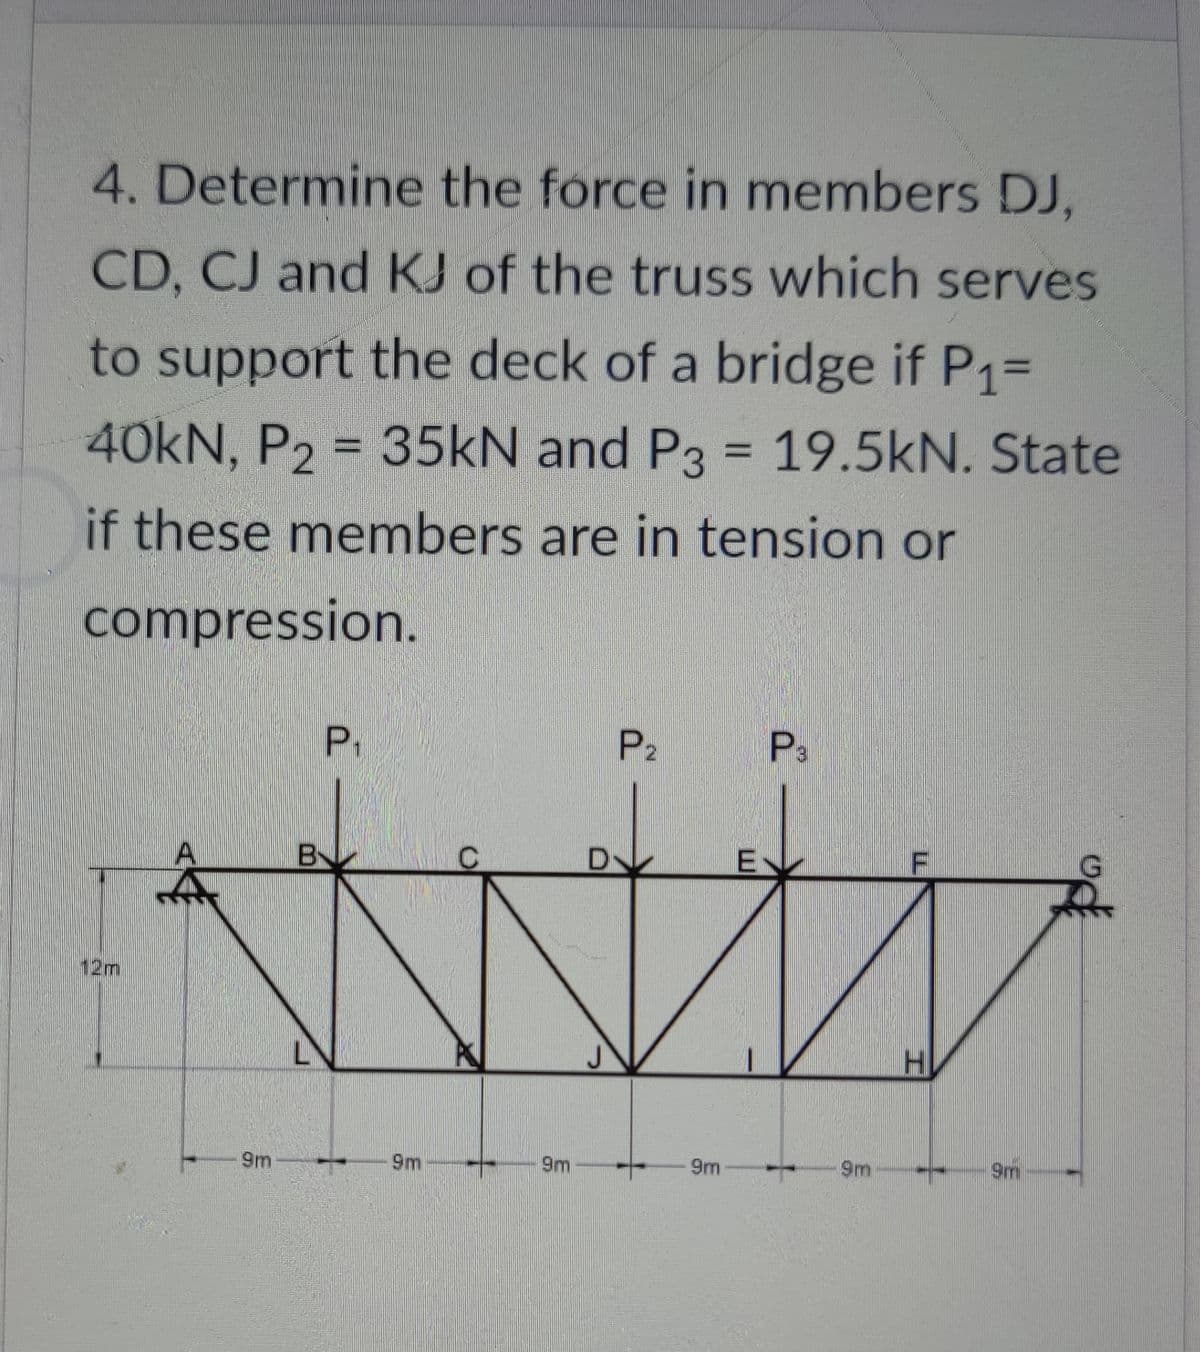 4. Determine the force in members DJ,
CD, CJ and KJ of the truss which serves
to support the deck of a bridge if P1%D
40KN, P2 = 35KN and P3 = 19.5kN. State
if these members are in tension or
compression.
P.
P2
P3
E
12m
9m
9m
9m
9m
9m
9m
